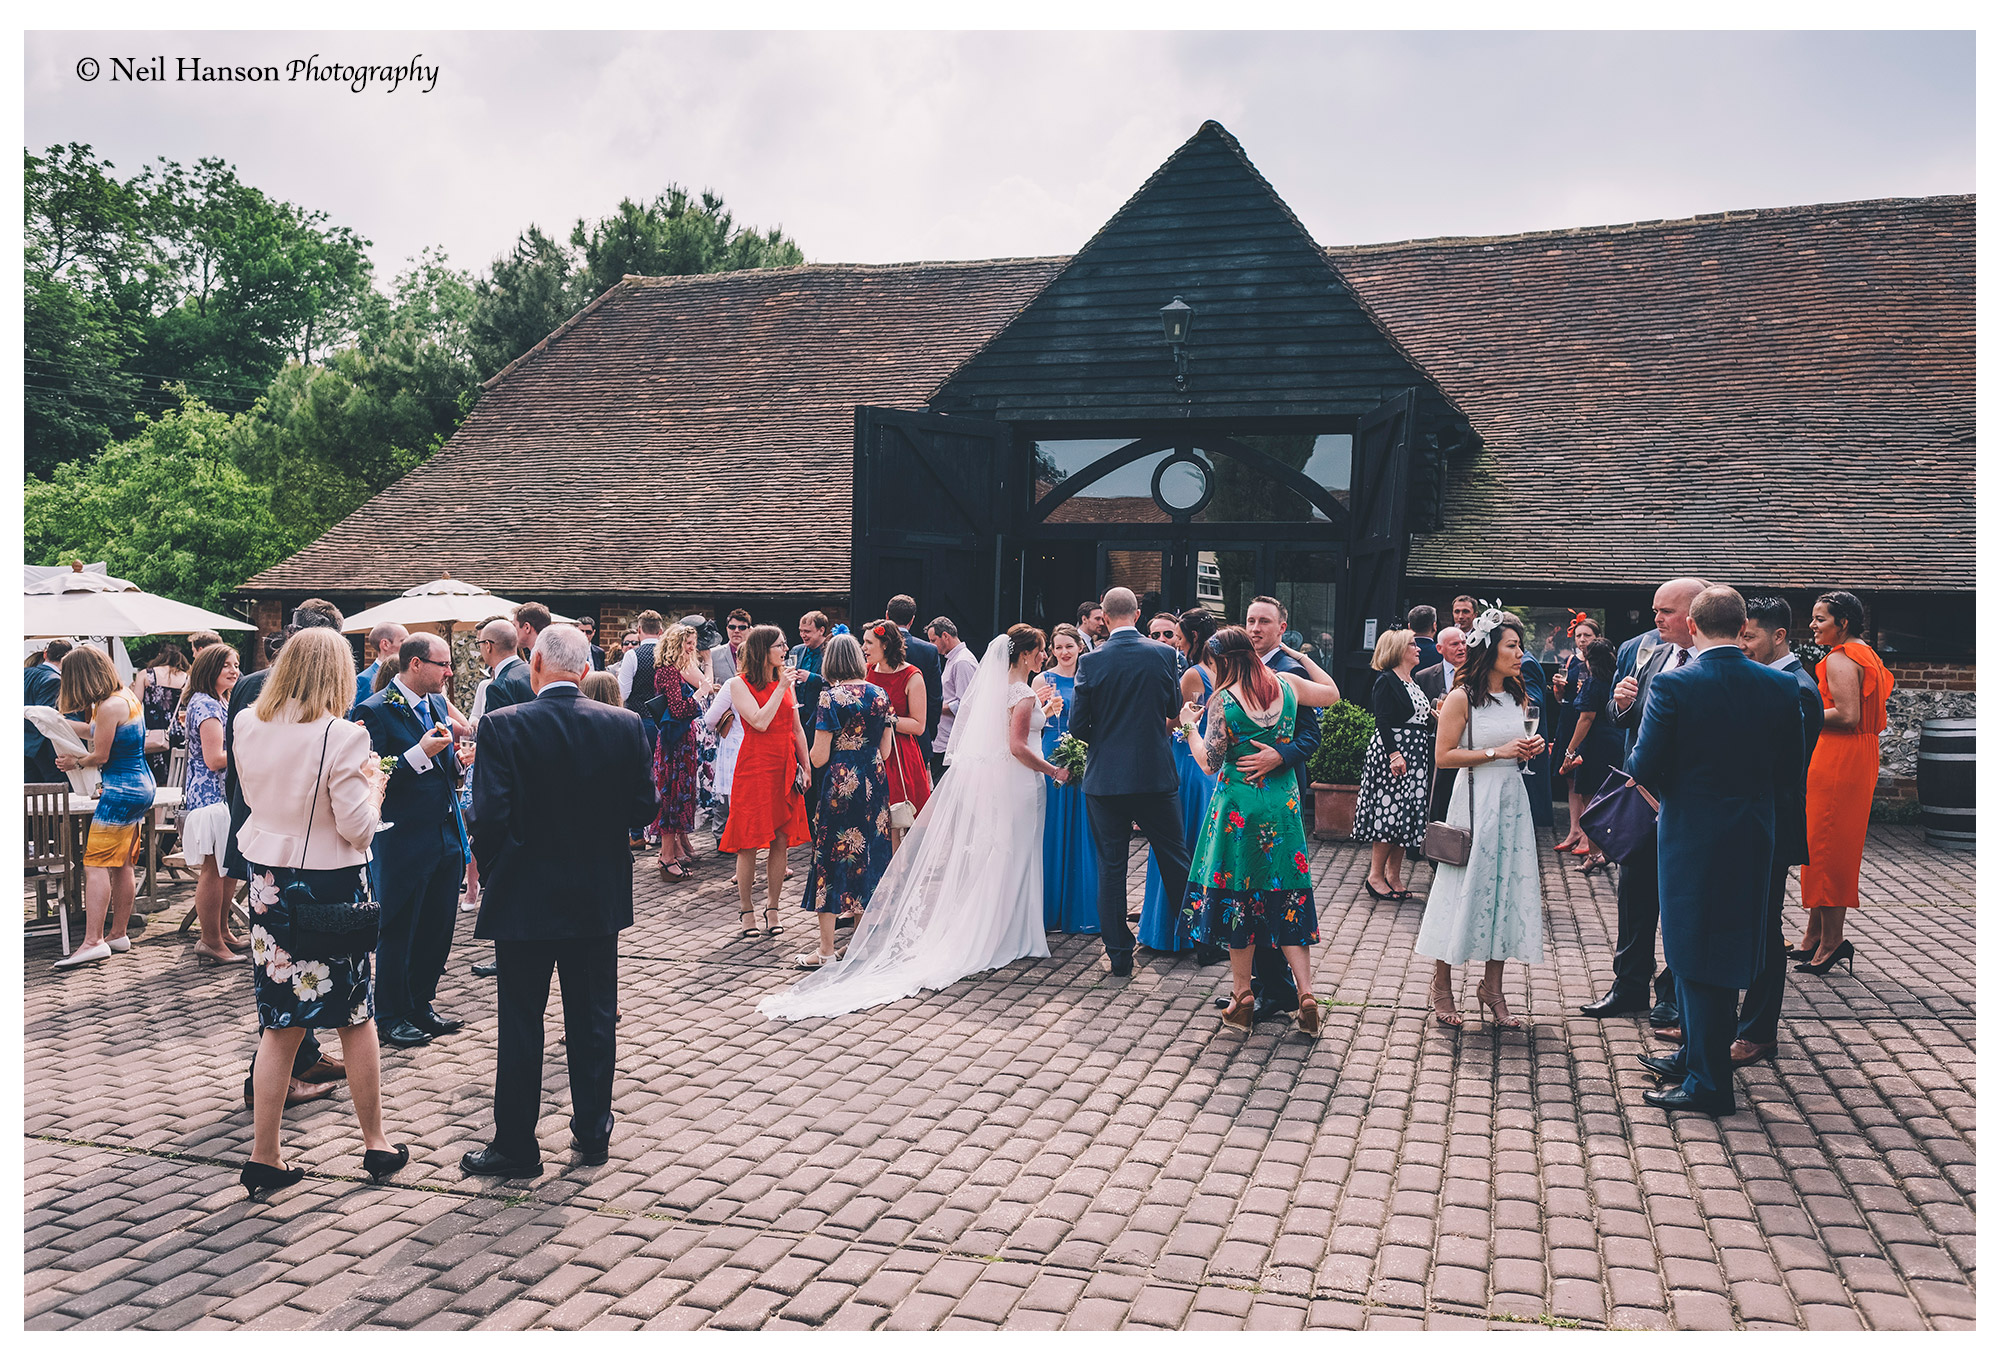 Outdoor drinks reception at Old Luxters Barn near Henley-on-Thanmes